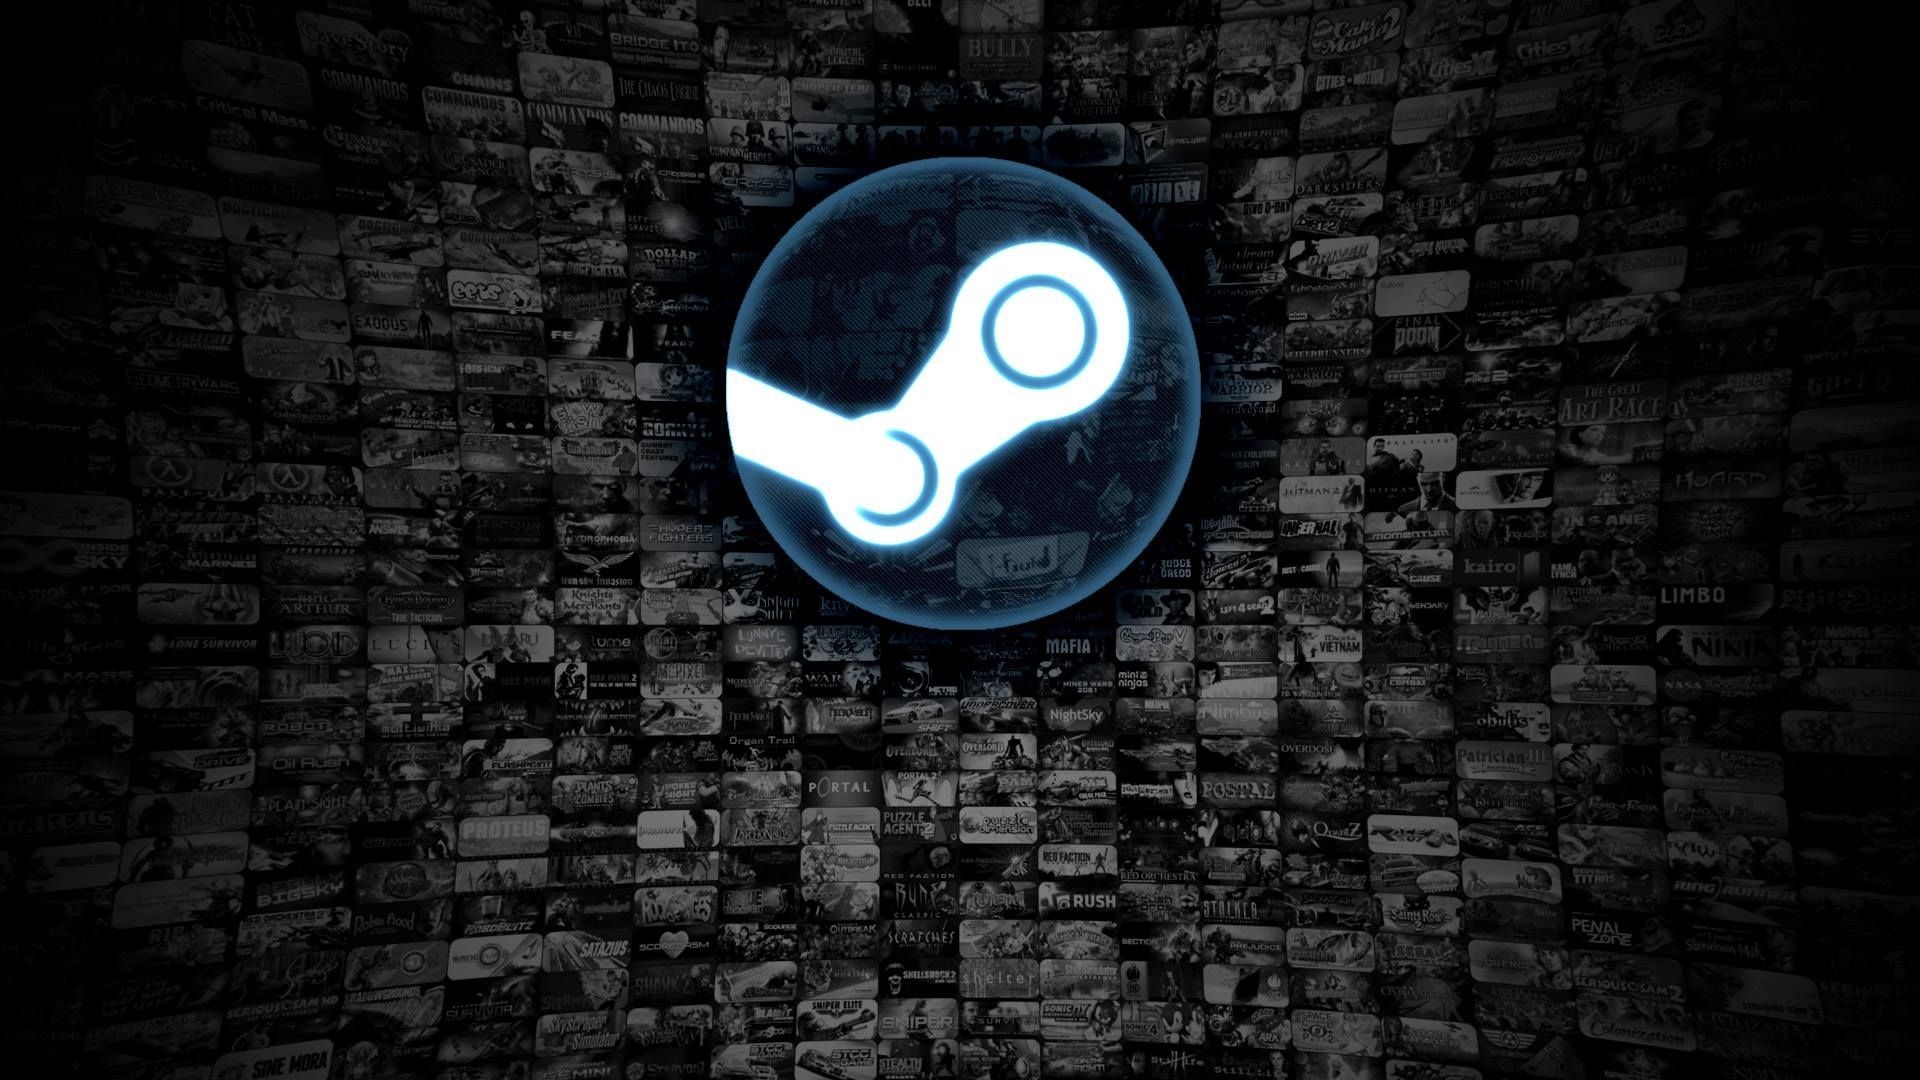 Steam: A convenient platform for game developers, Purchasing and playing games online. 1920x1080 Full HD Wallpaper.